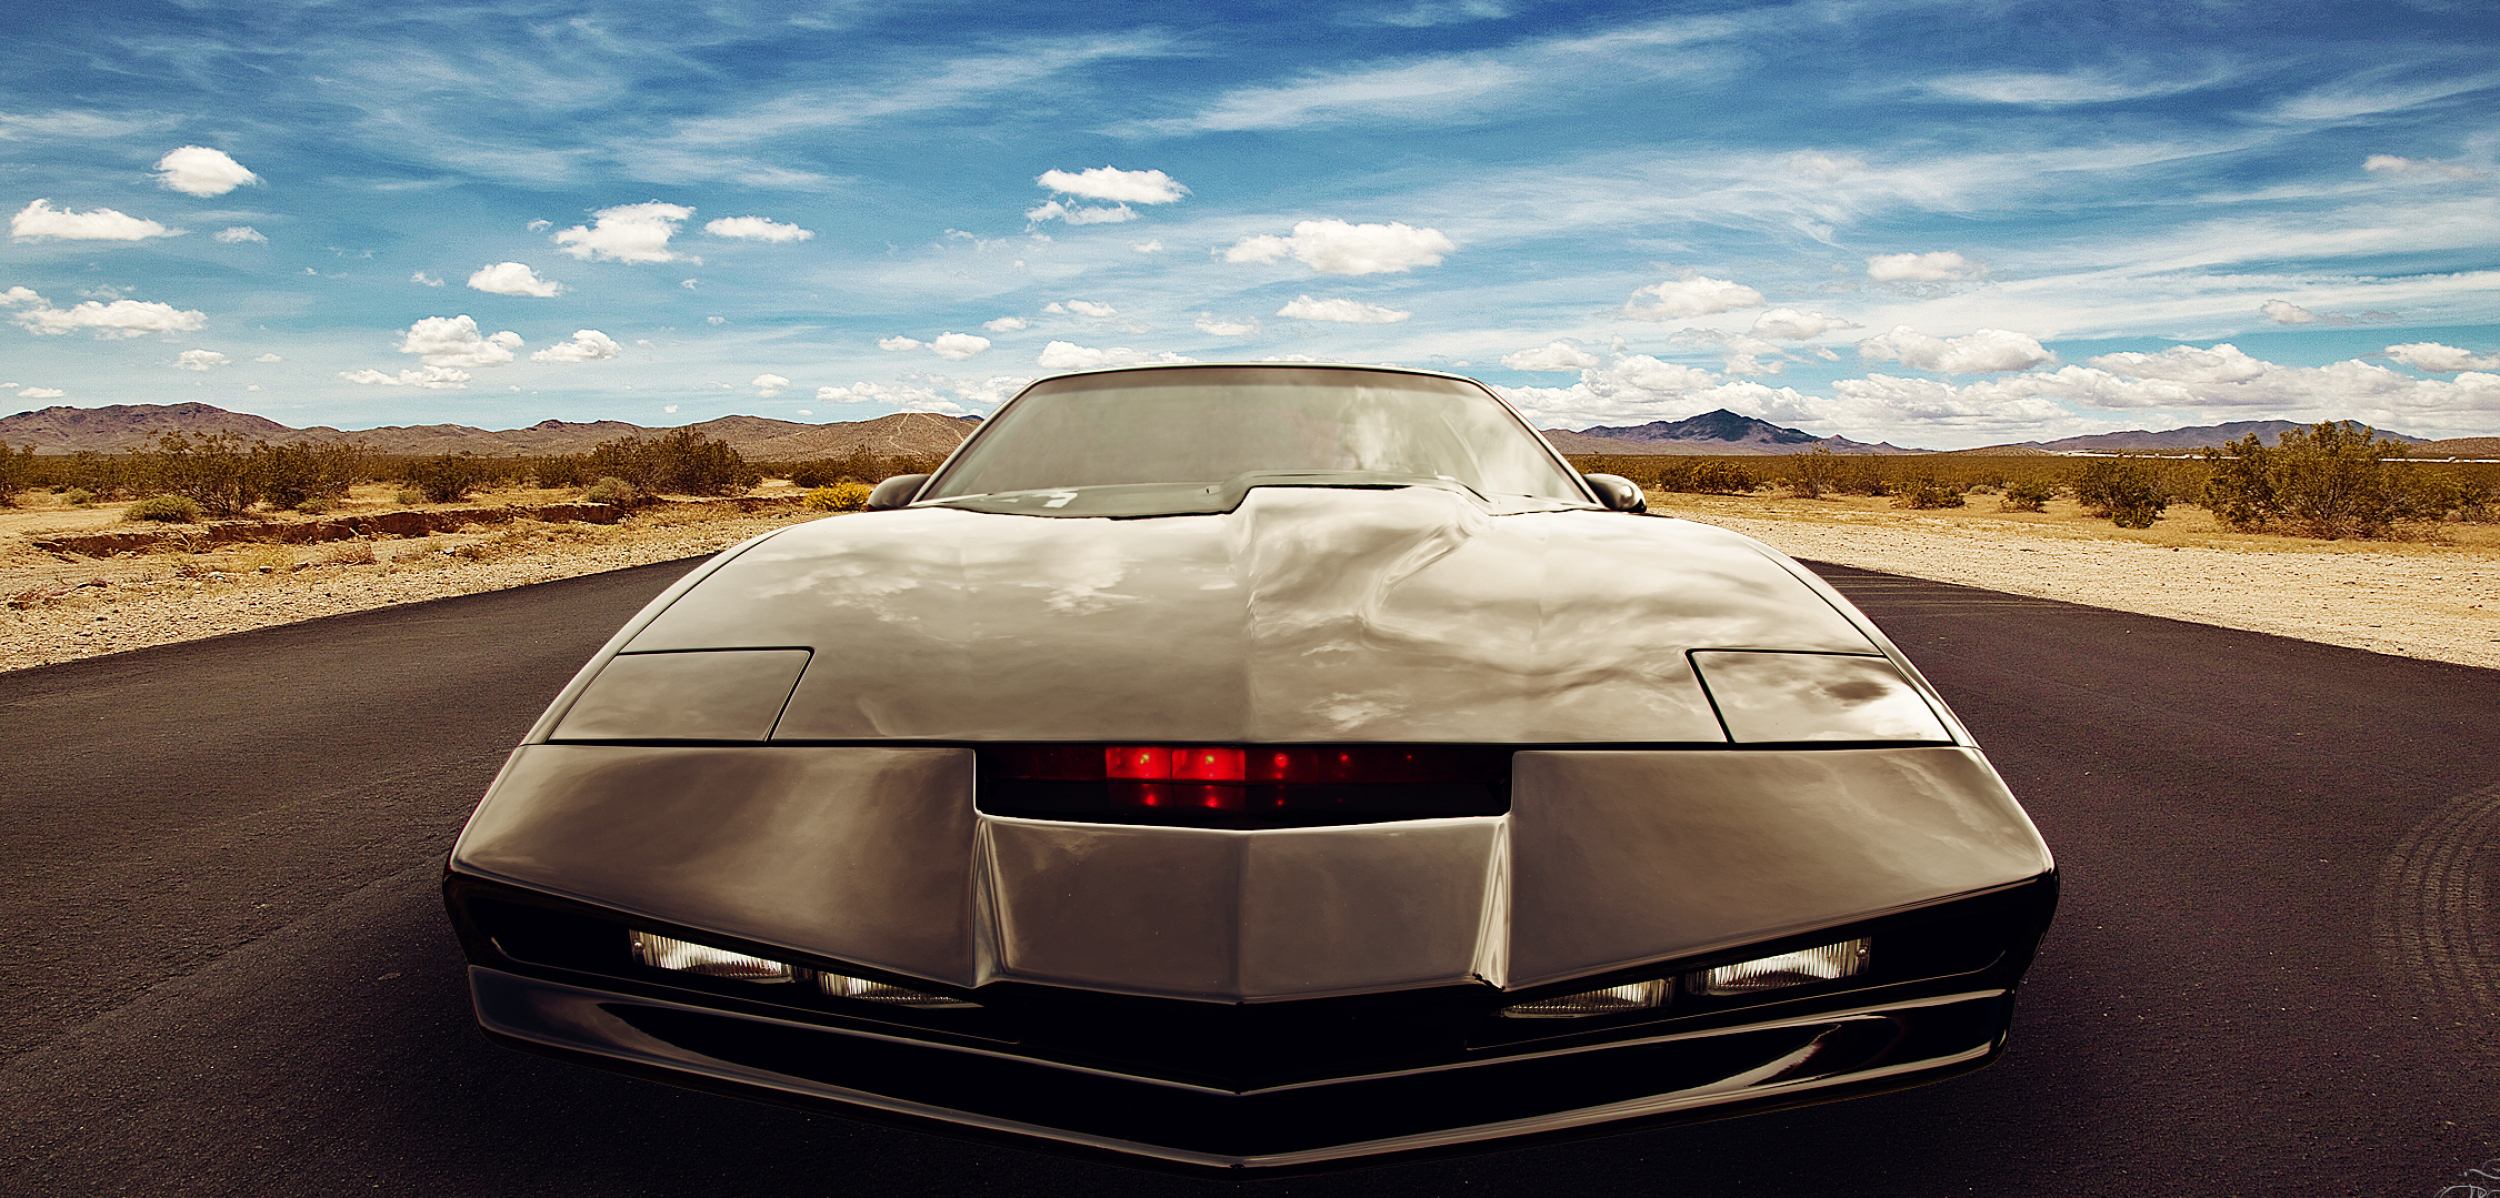 Advent calendar for Kitt, Special Knight Rider tribute, Exciting collectibles, Celebrating iconic car, 2500x1200 Dual Screen Desktop